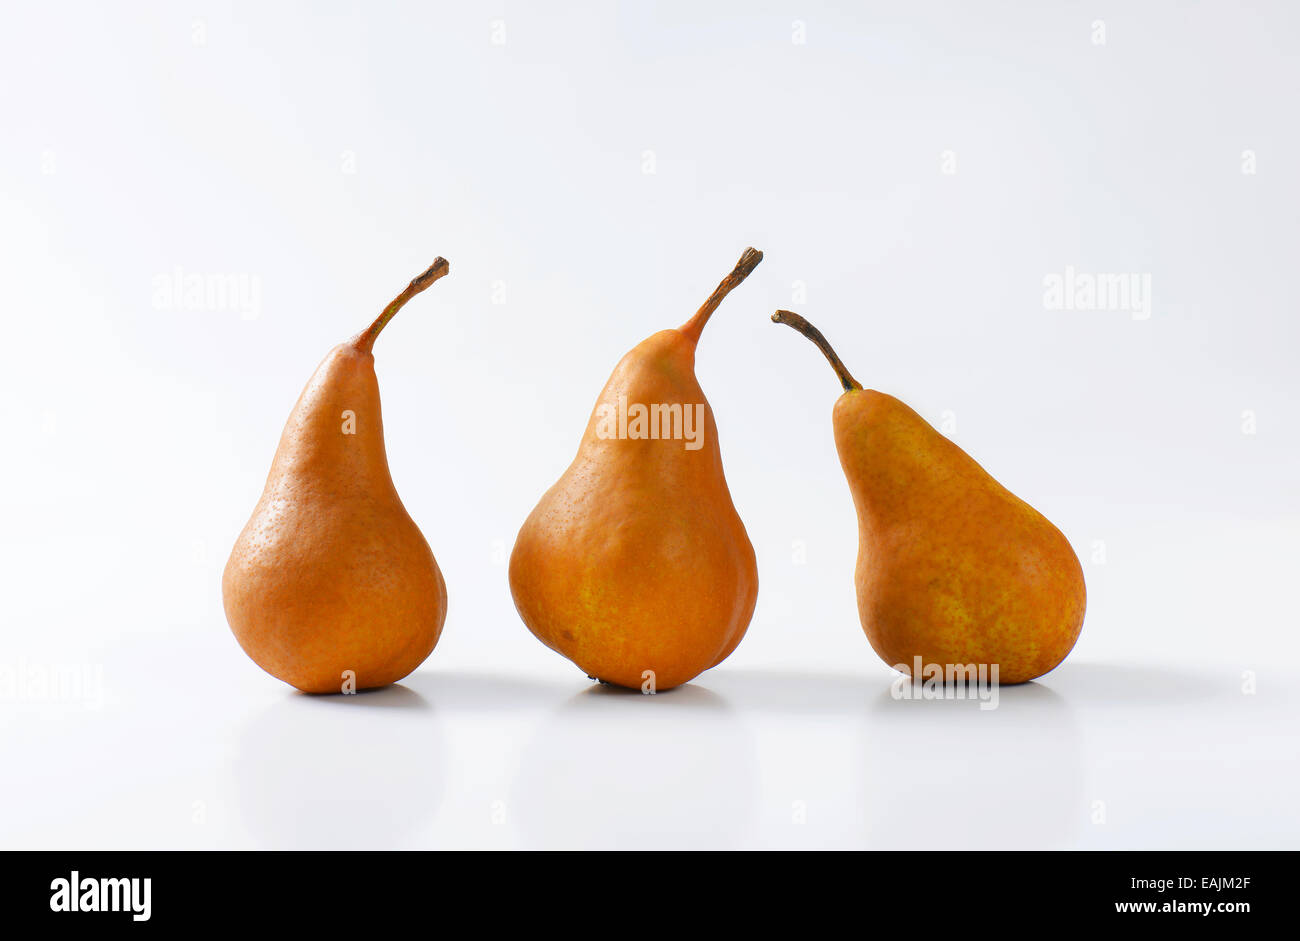 European pears with elongated slender neck and russeted skin Stock Photo